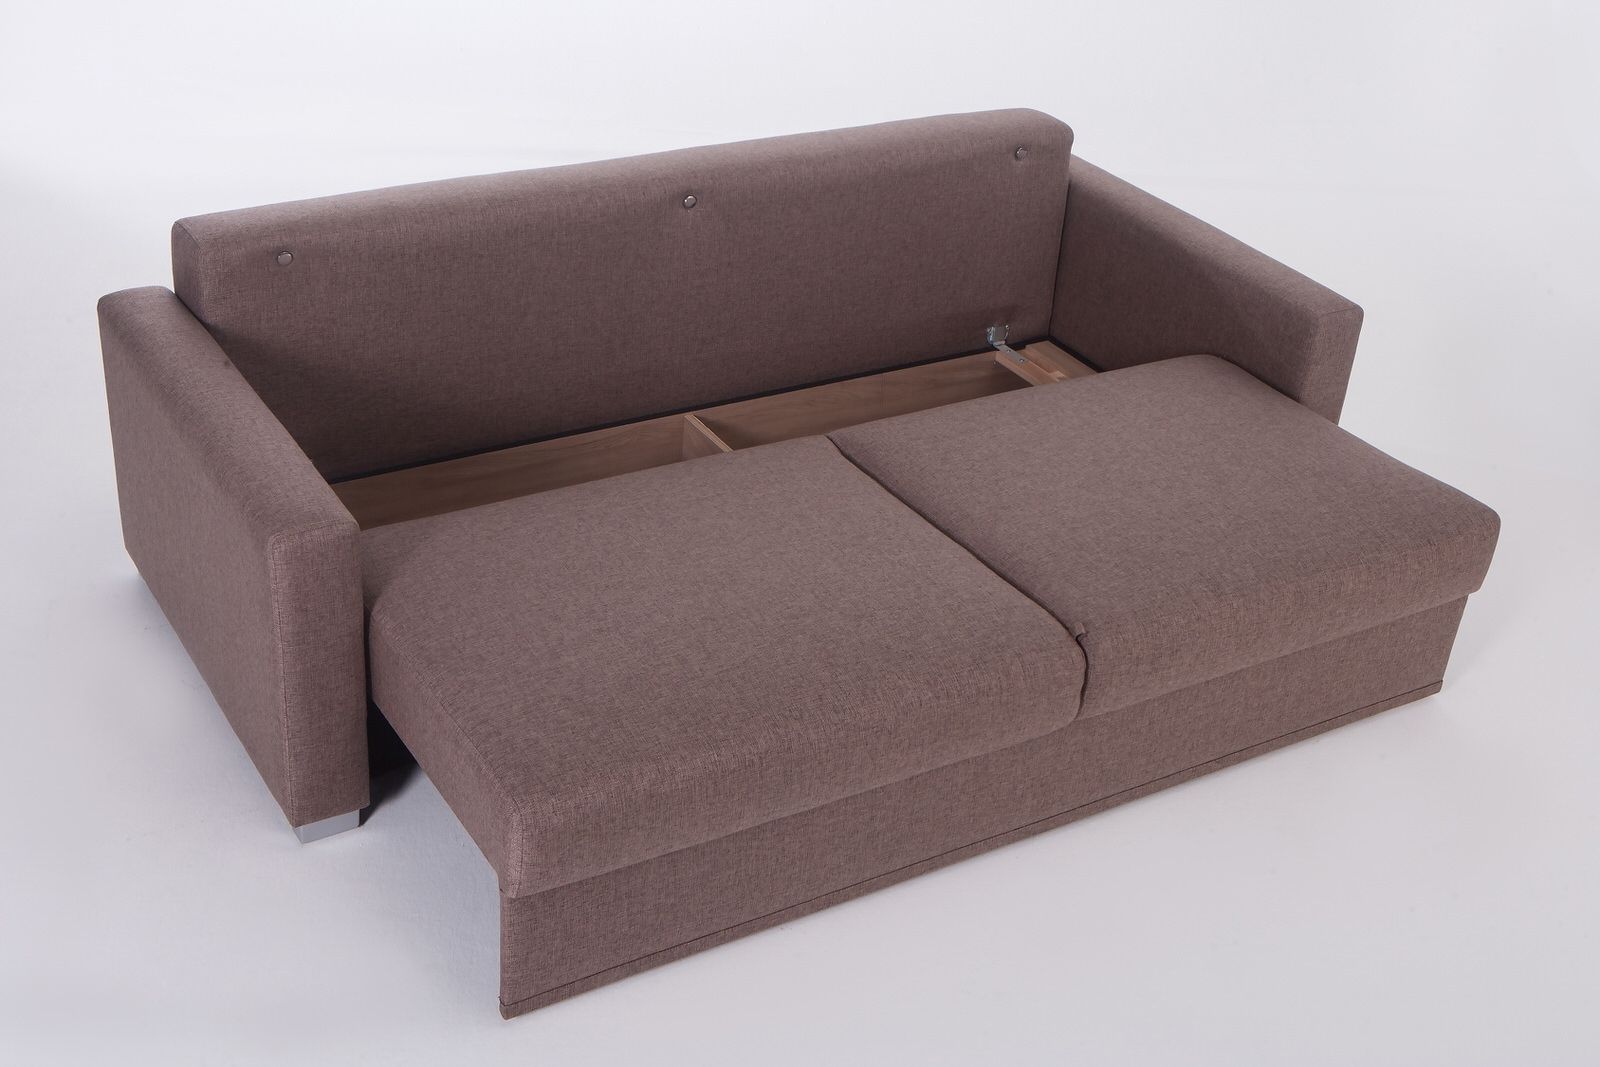 Sectional Sofa Bed With Storage — Cabinets, Beds, Sofas And With Convertible Sofas (View 10 of 10)